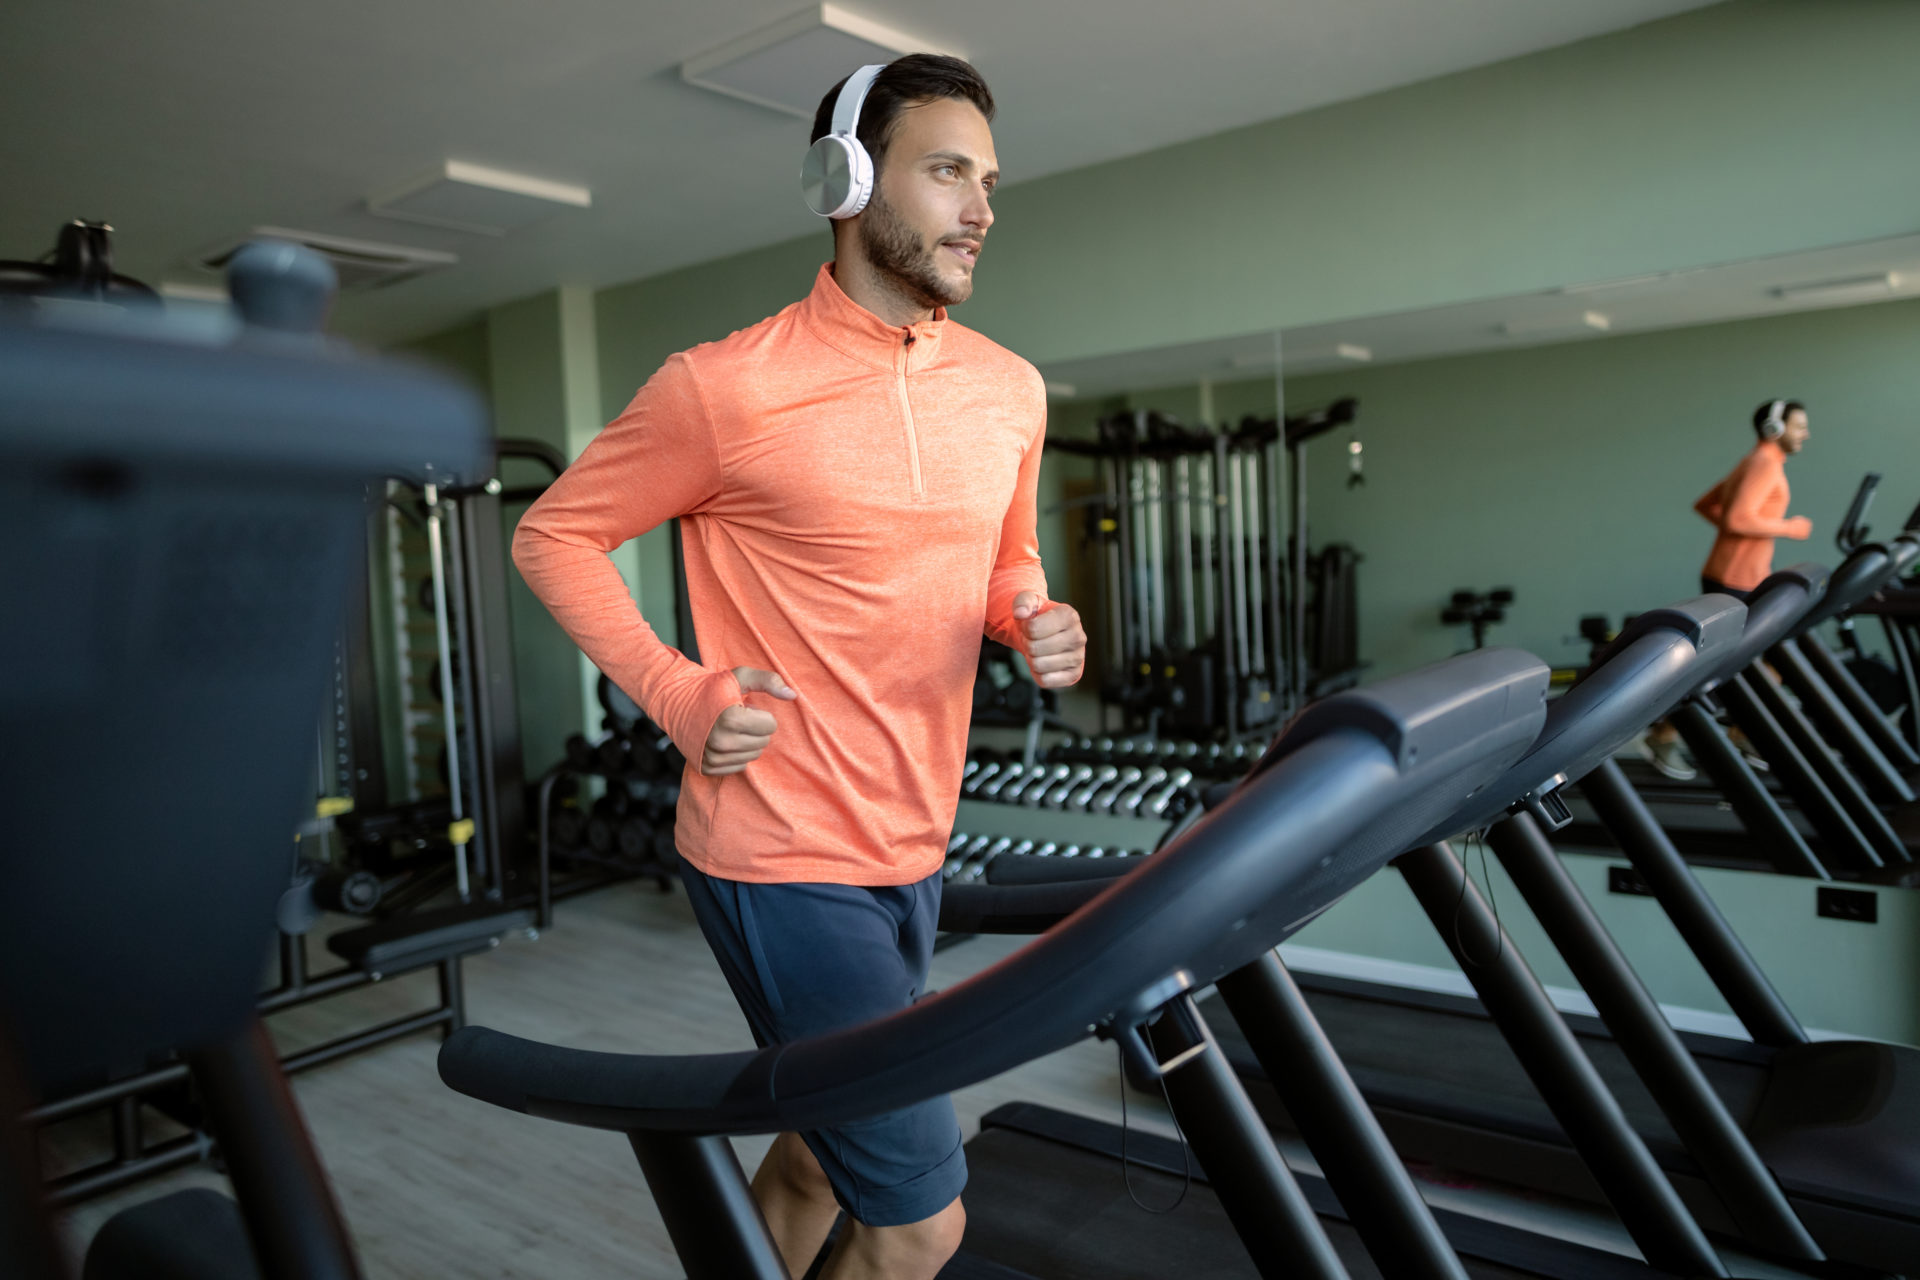 Determined athlete with headphones running on treadmill in a gym.